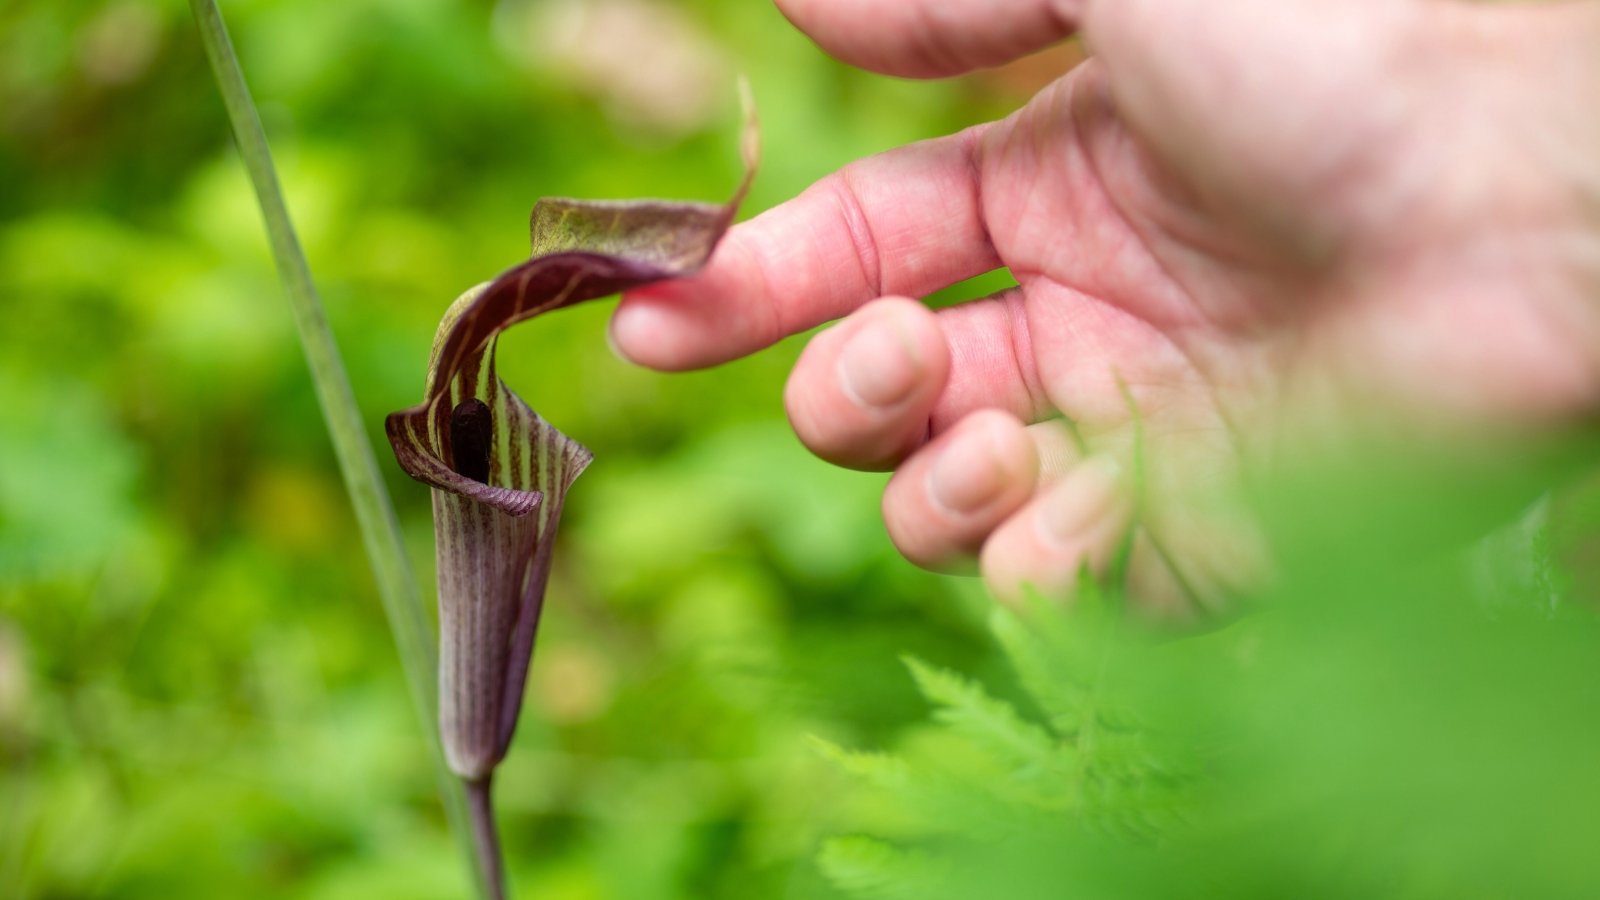 Close-up of a human hand touching Arisaema triphyllum which boasts a unique flower with a striped, hooded spathe enveloping a slender spadix.